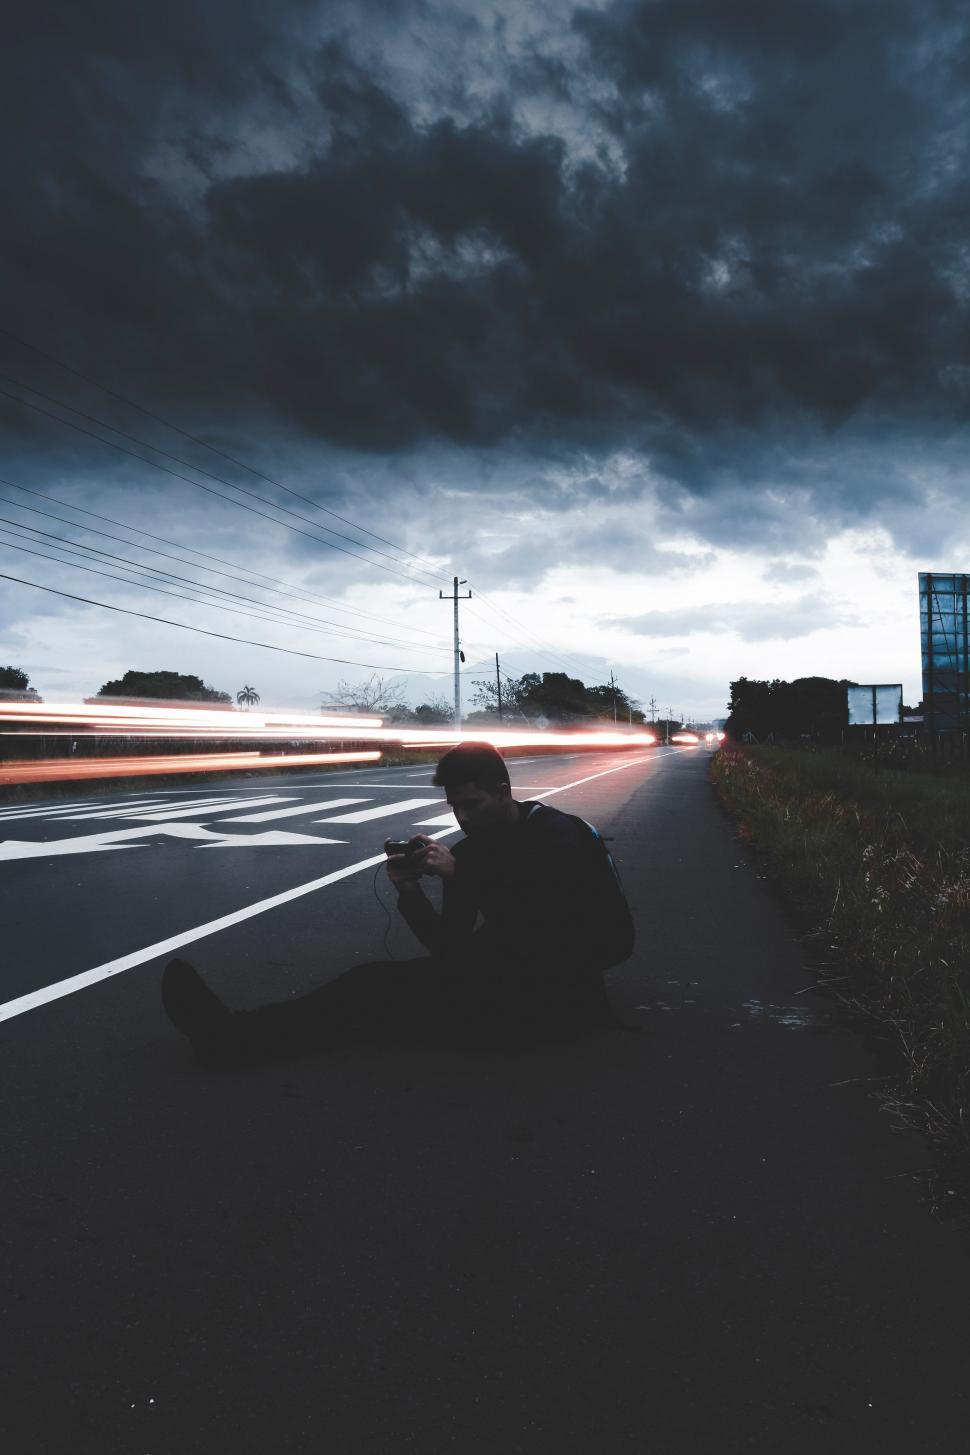 Free Image of Man Sitting by Road Under Cloudy Sky 